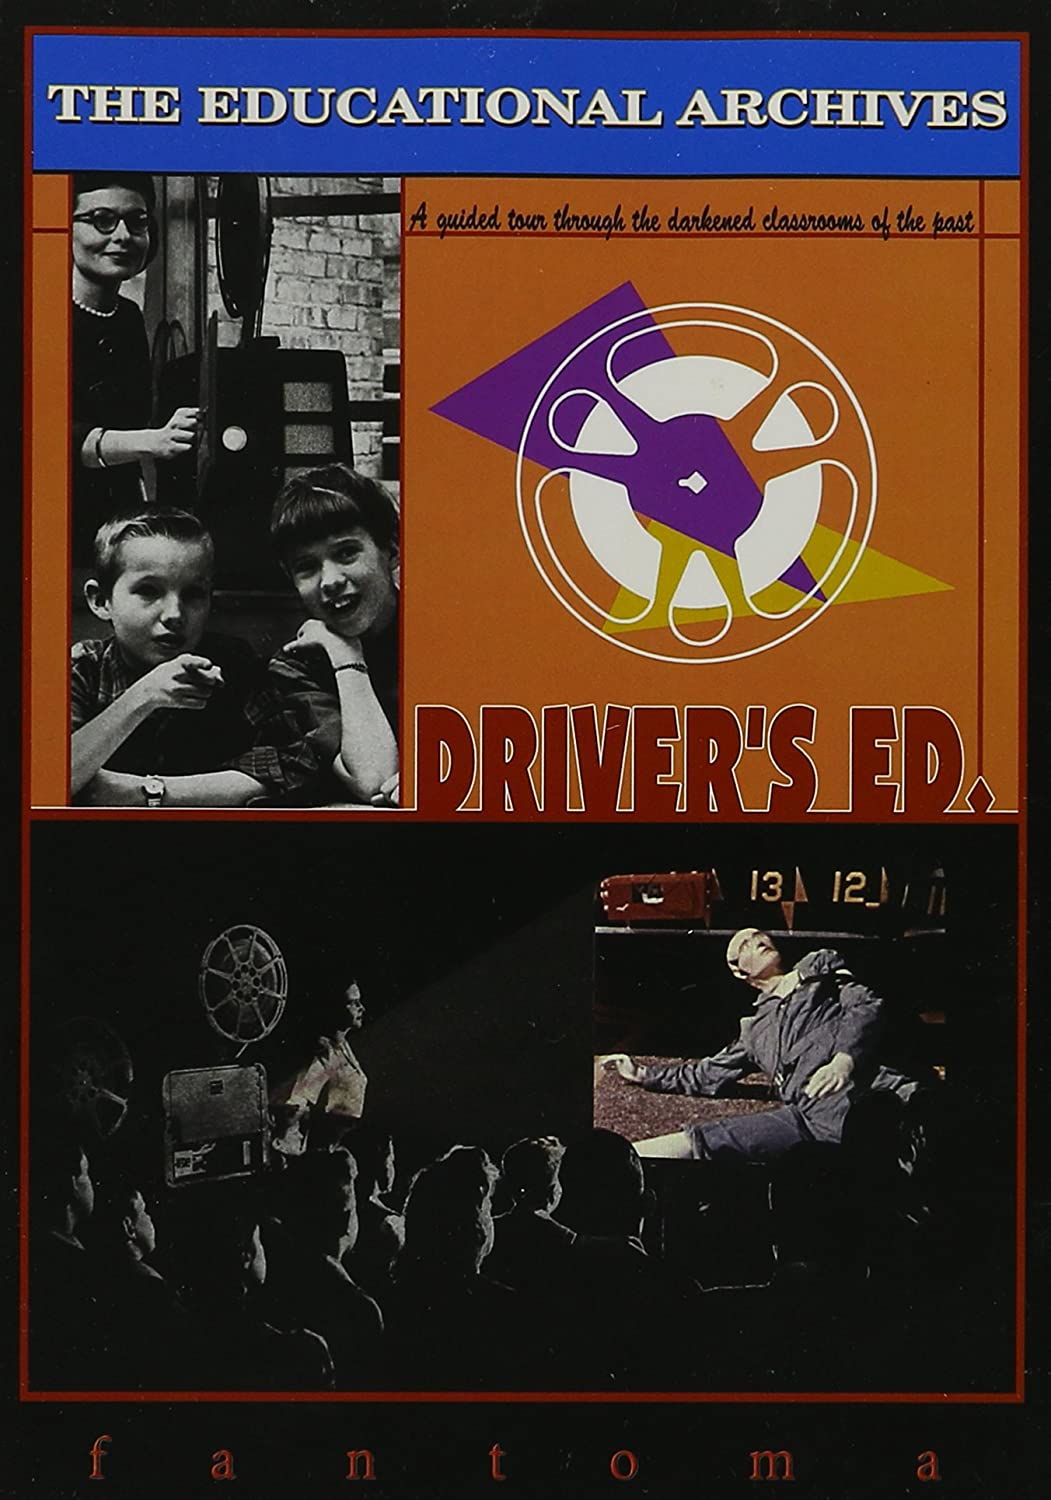 THE EDUCATIONAL ARCHIVES: DRIVER'S ED DVD